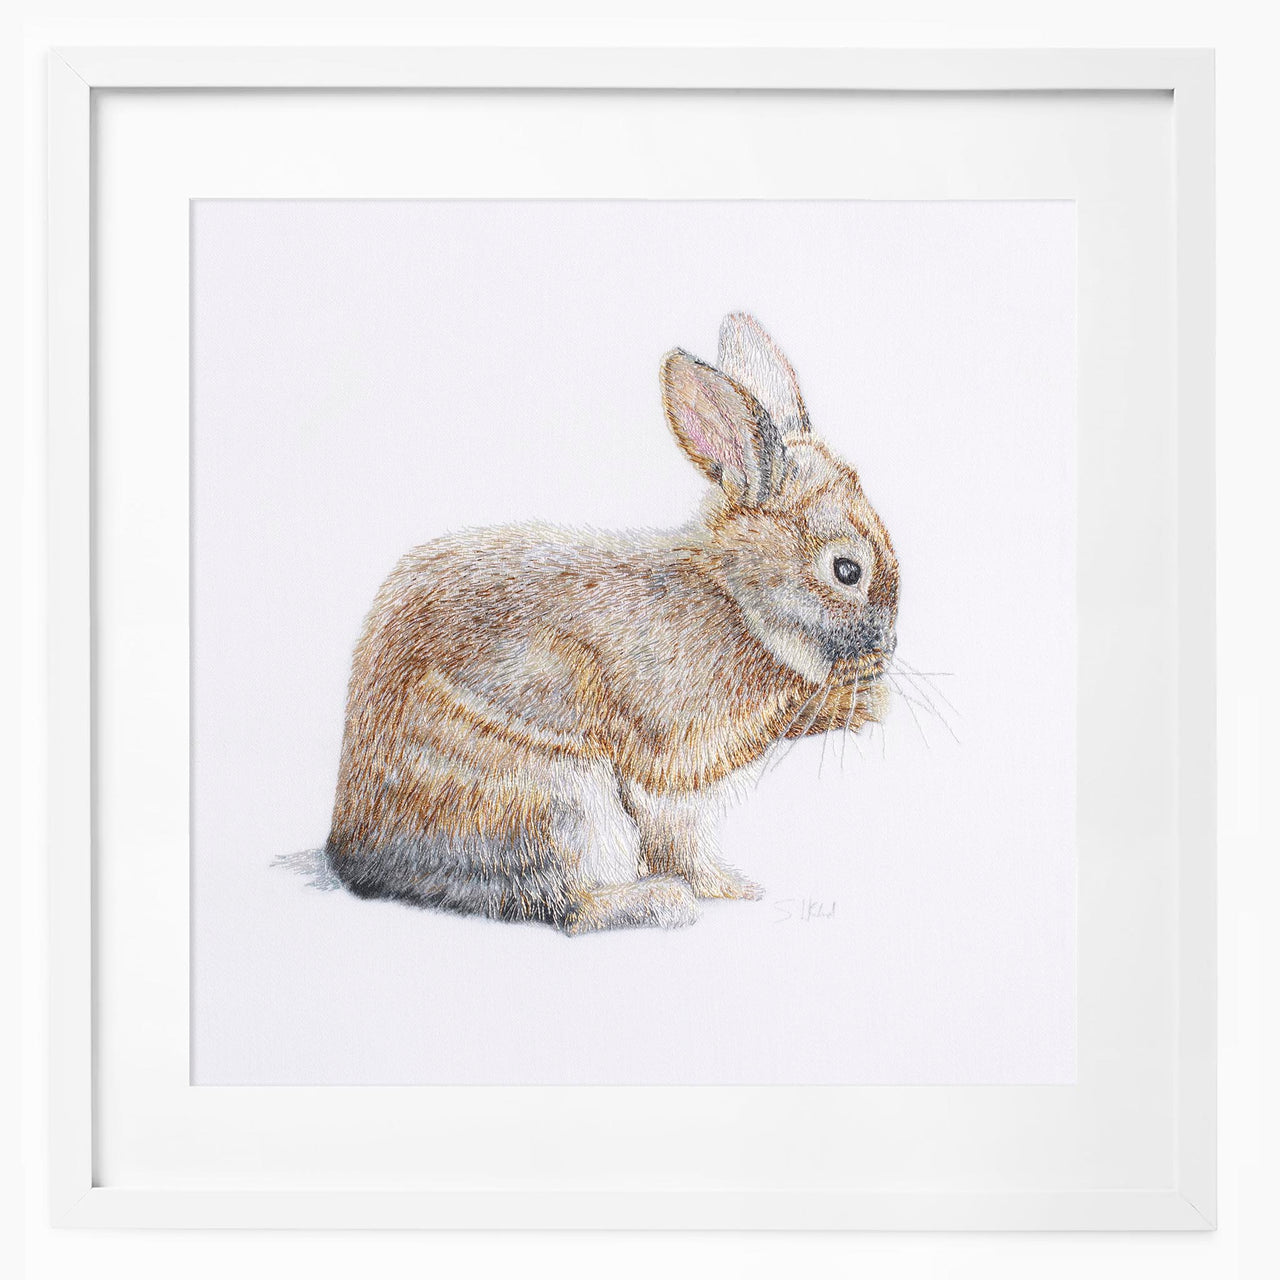 Hand embroidered bunny limited edition print in white frame